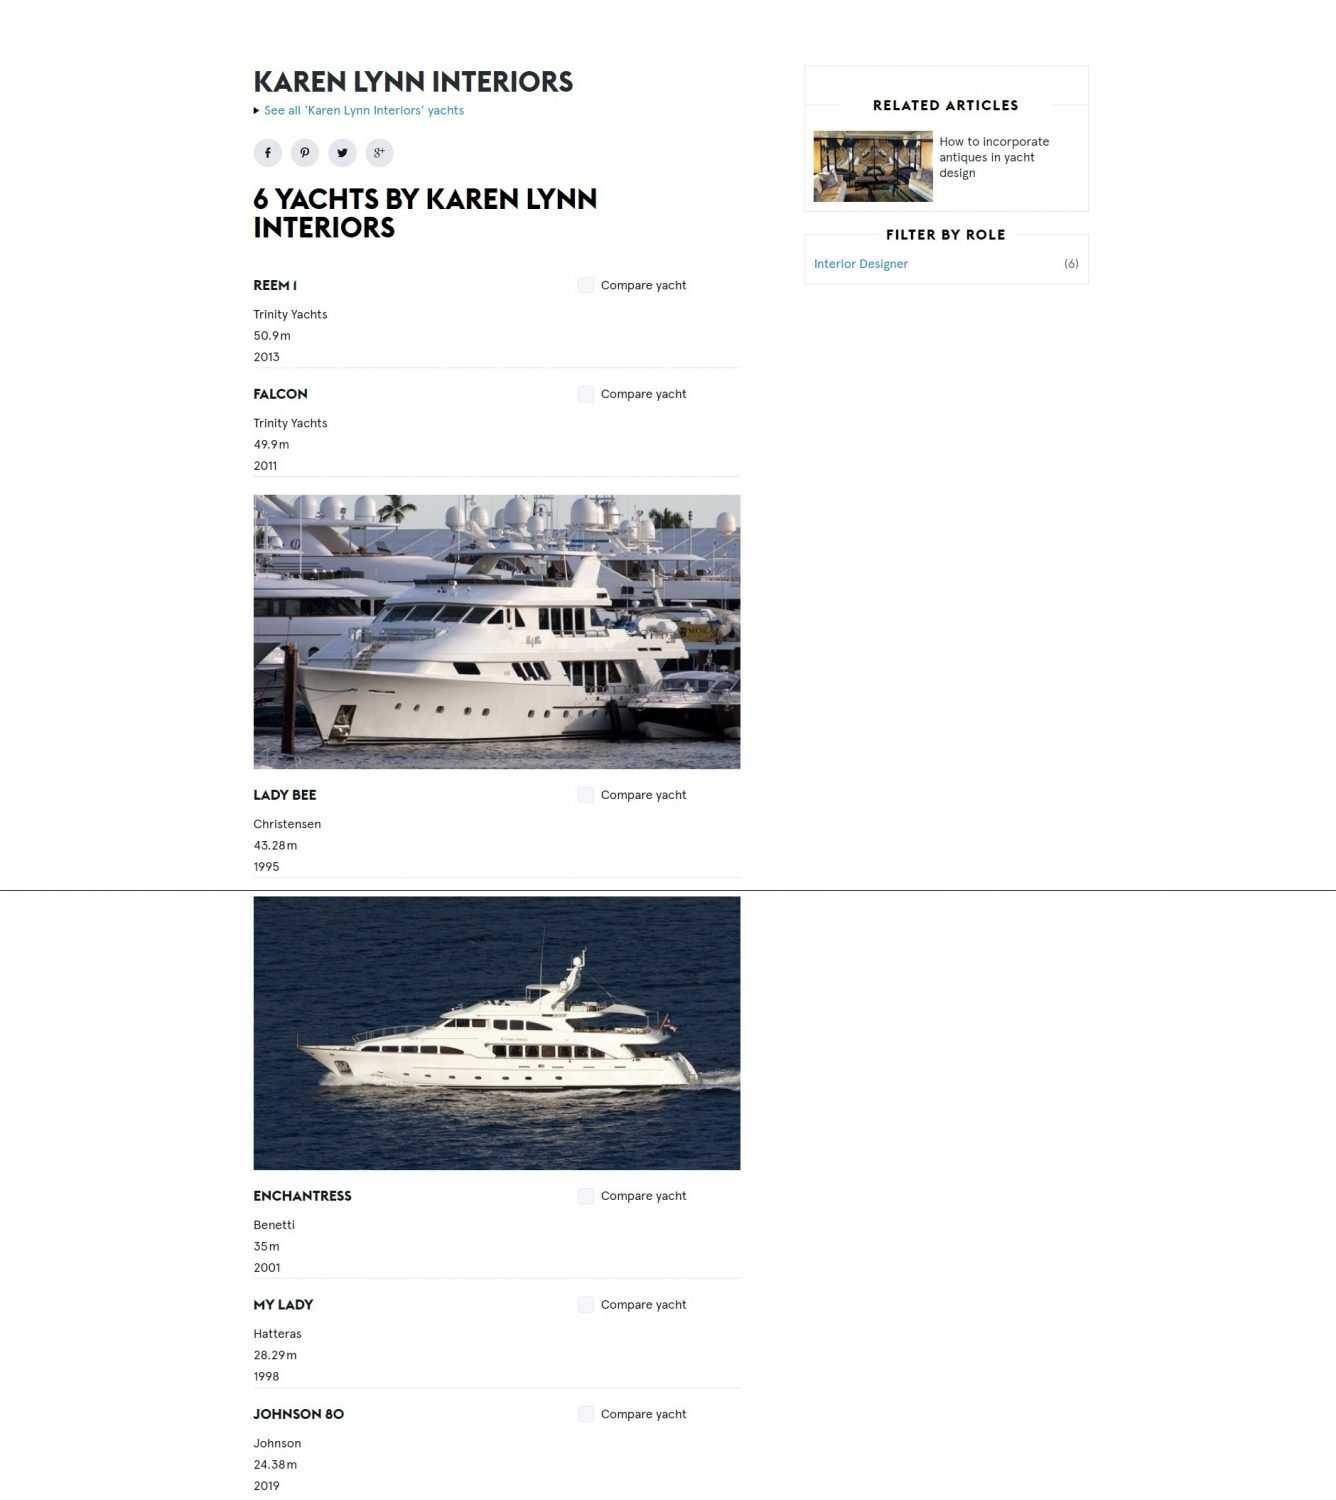 Boat Intl - Karen Lynn Interiors - Interior Design for Yacht, Aircrafts and Residential Projects